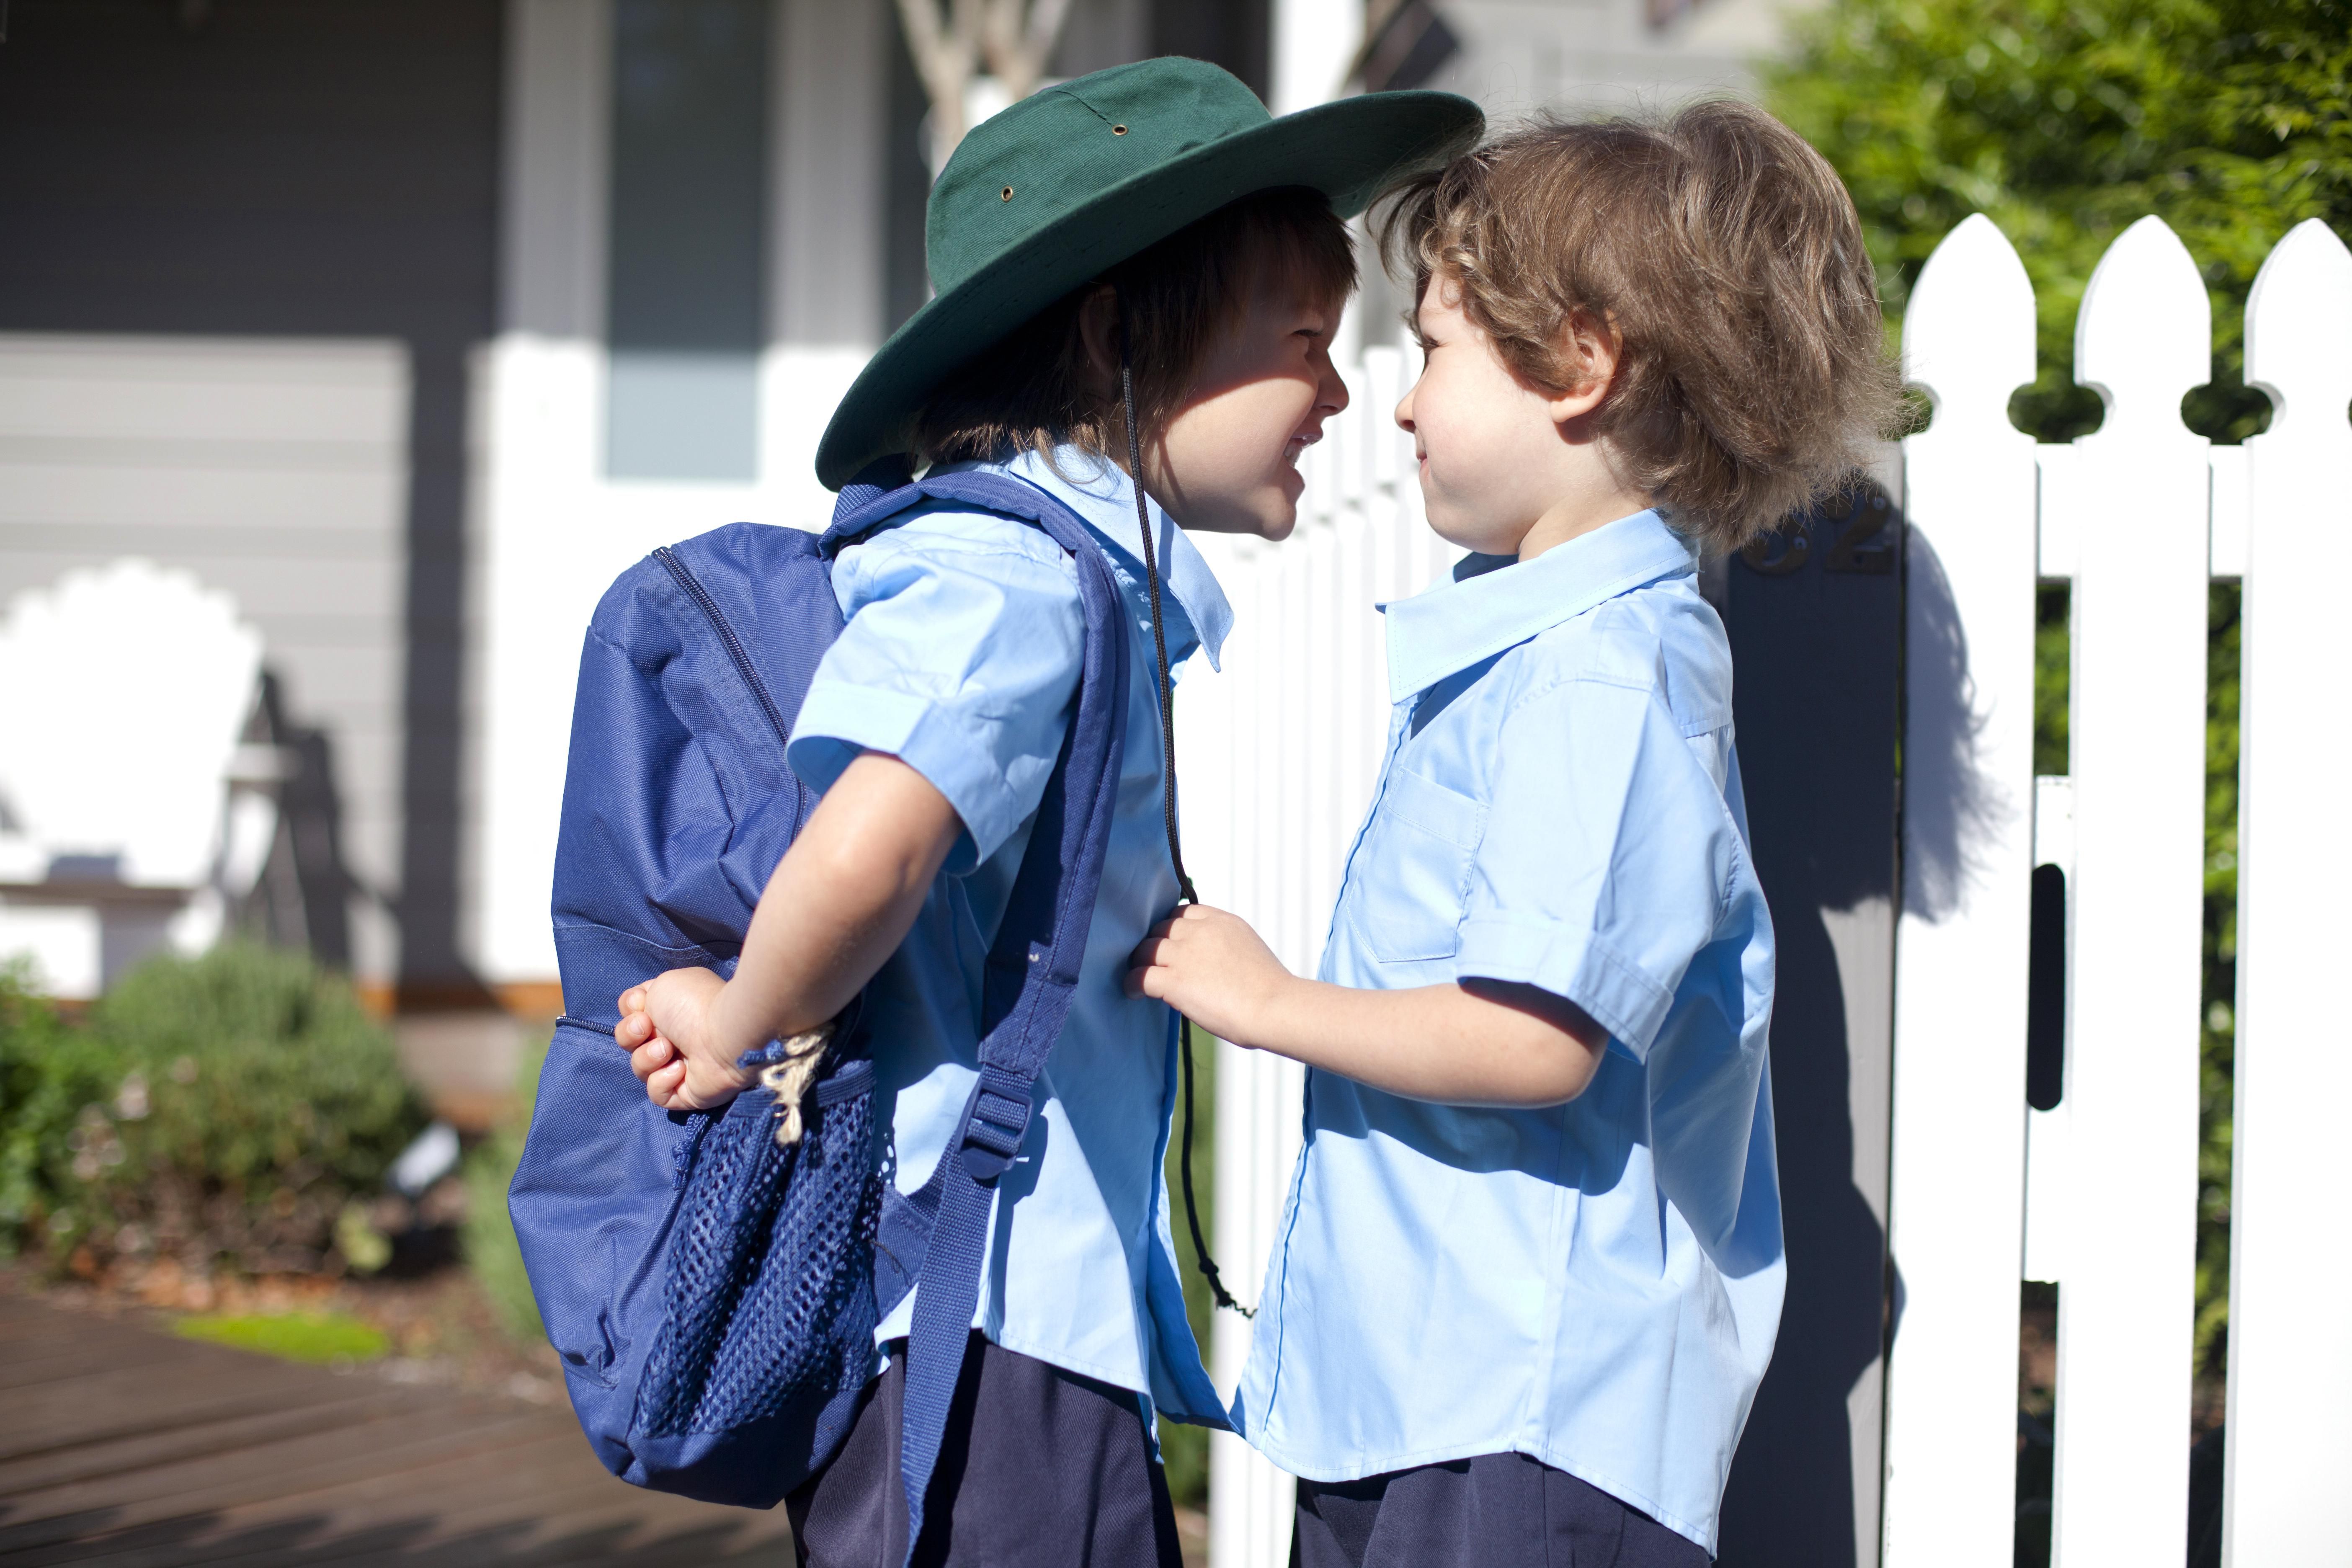 Dealing With a Preschool Bully - Know the Signs